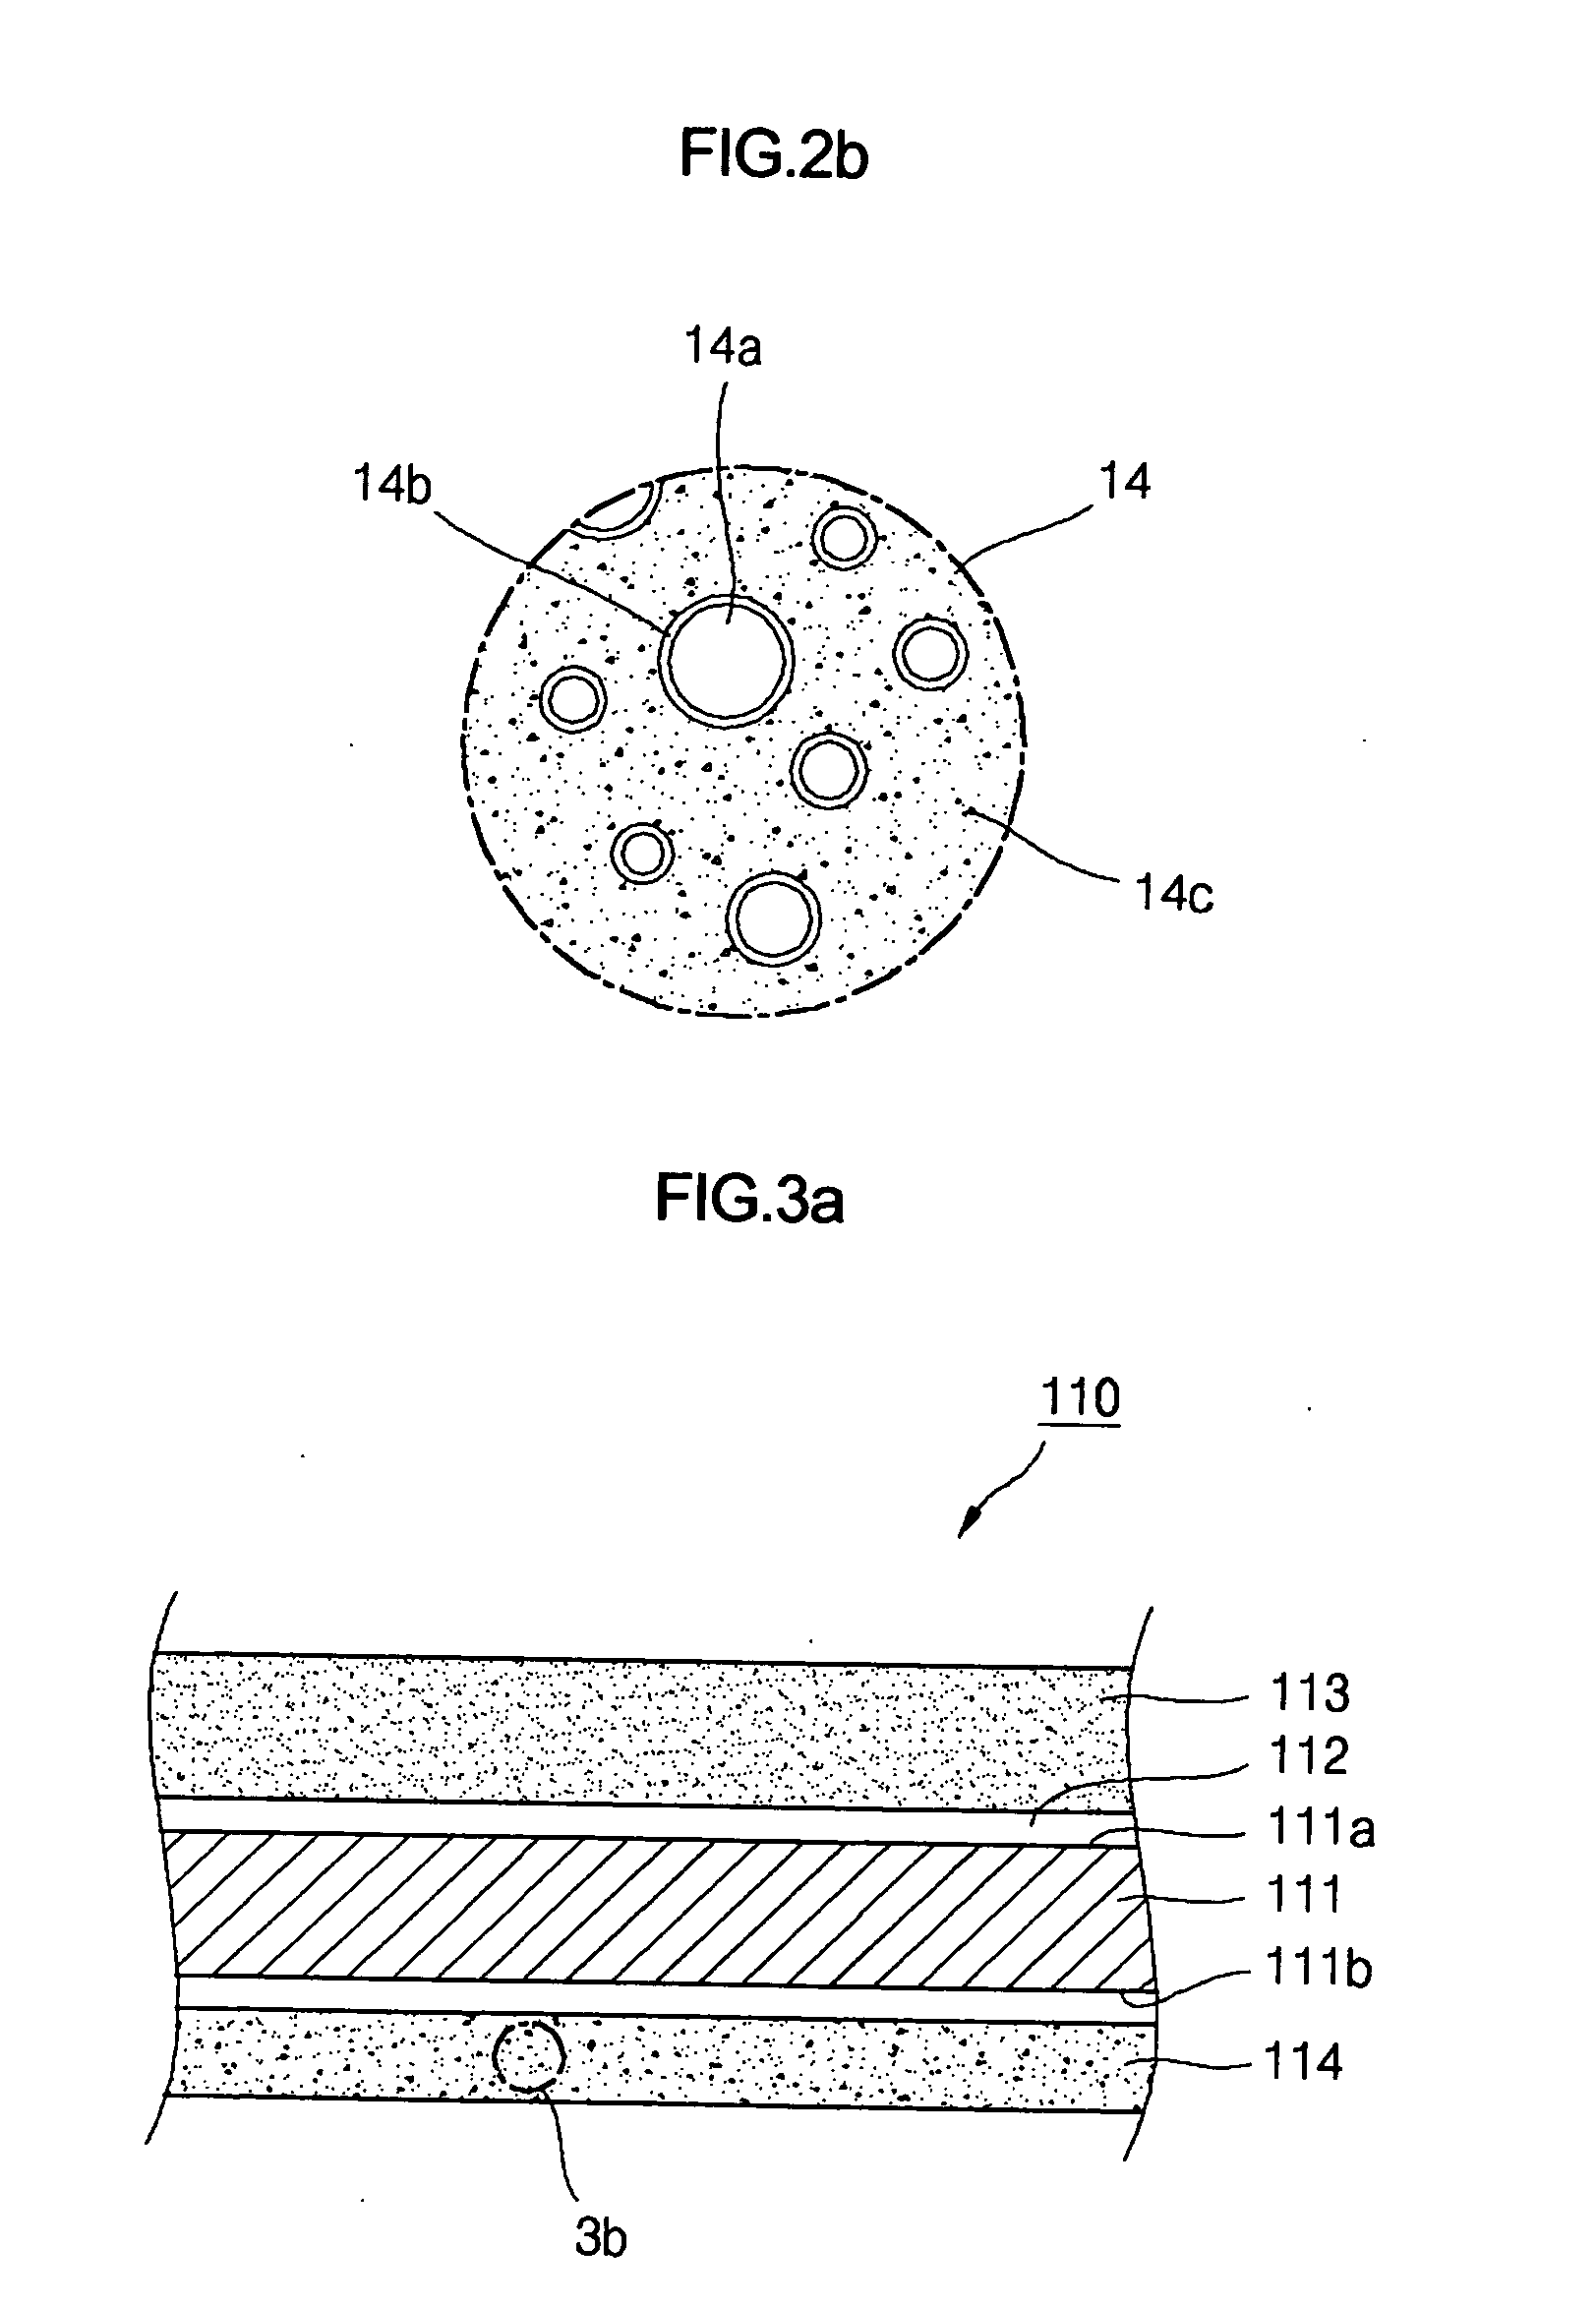 Battery sheath and lithium polymer battery using the same